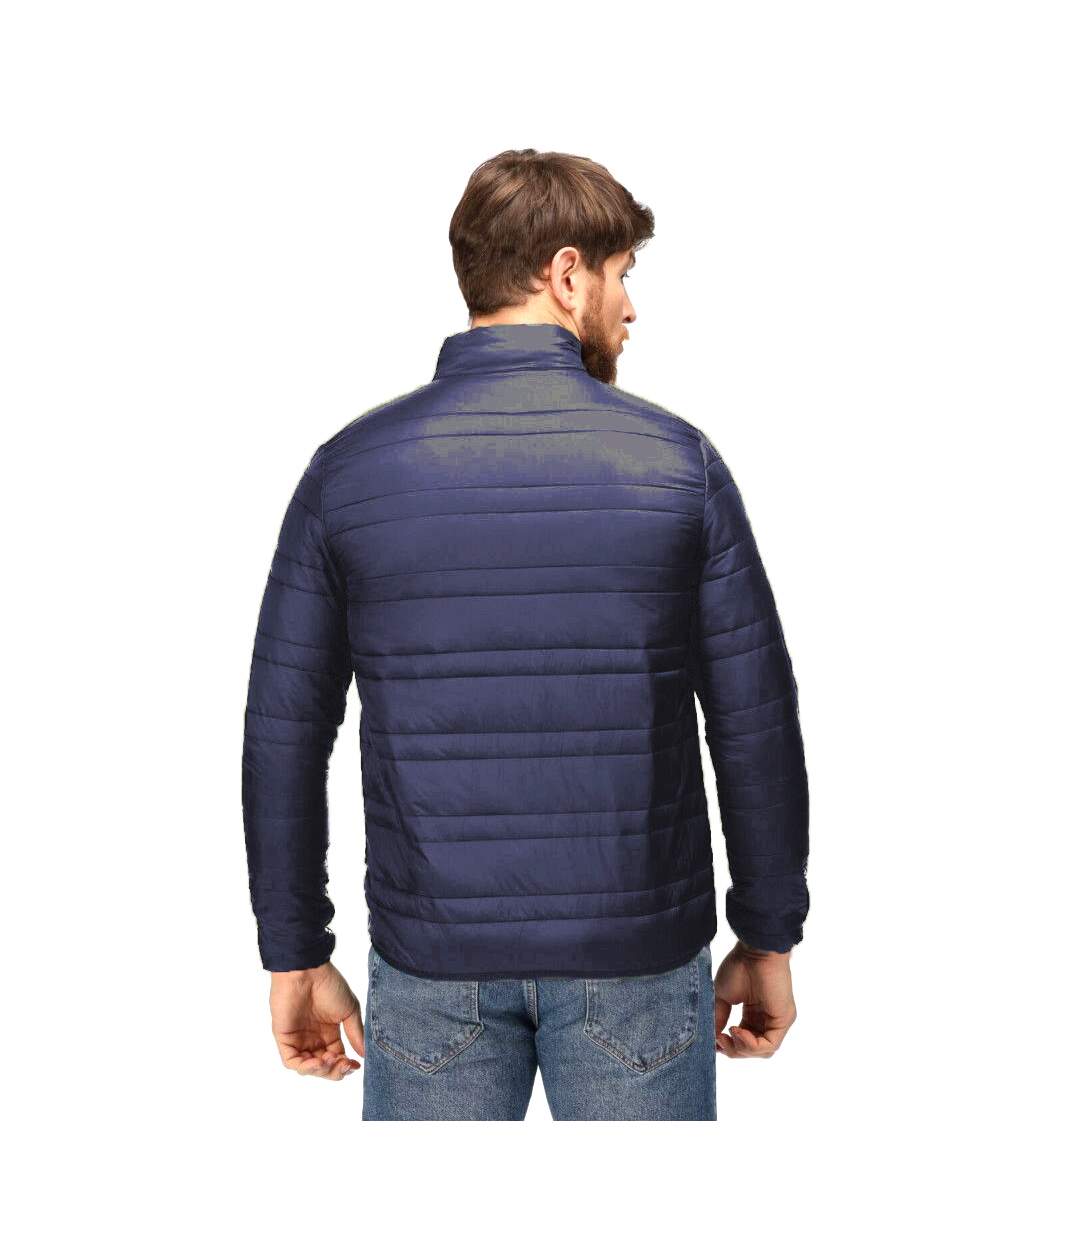 Regatta Professional Mens Firedown Insulated Jacket (Navy/French Blue)